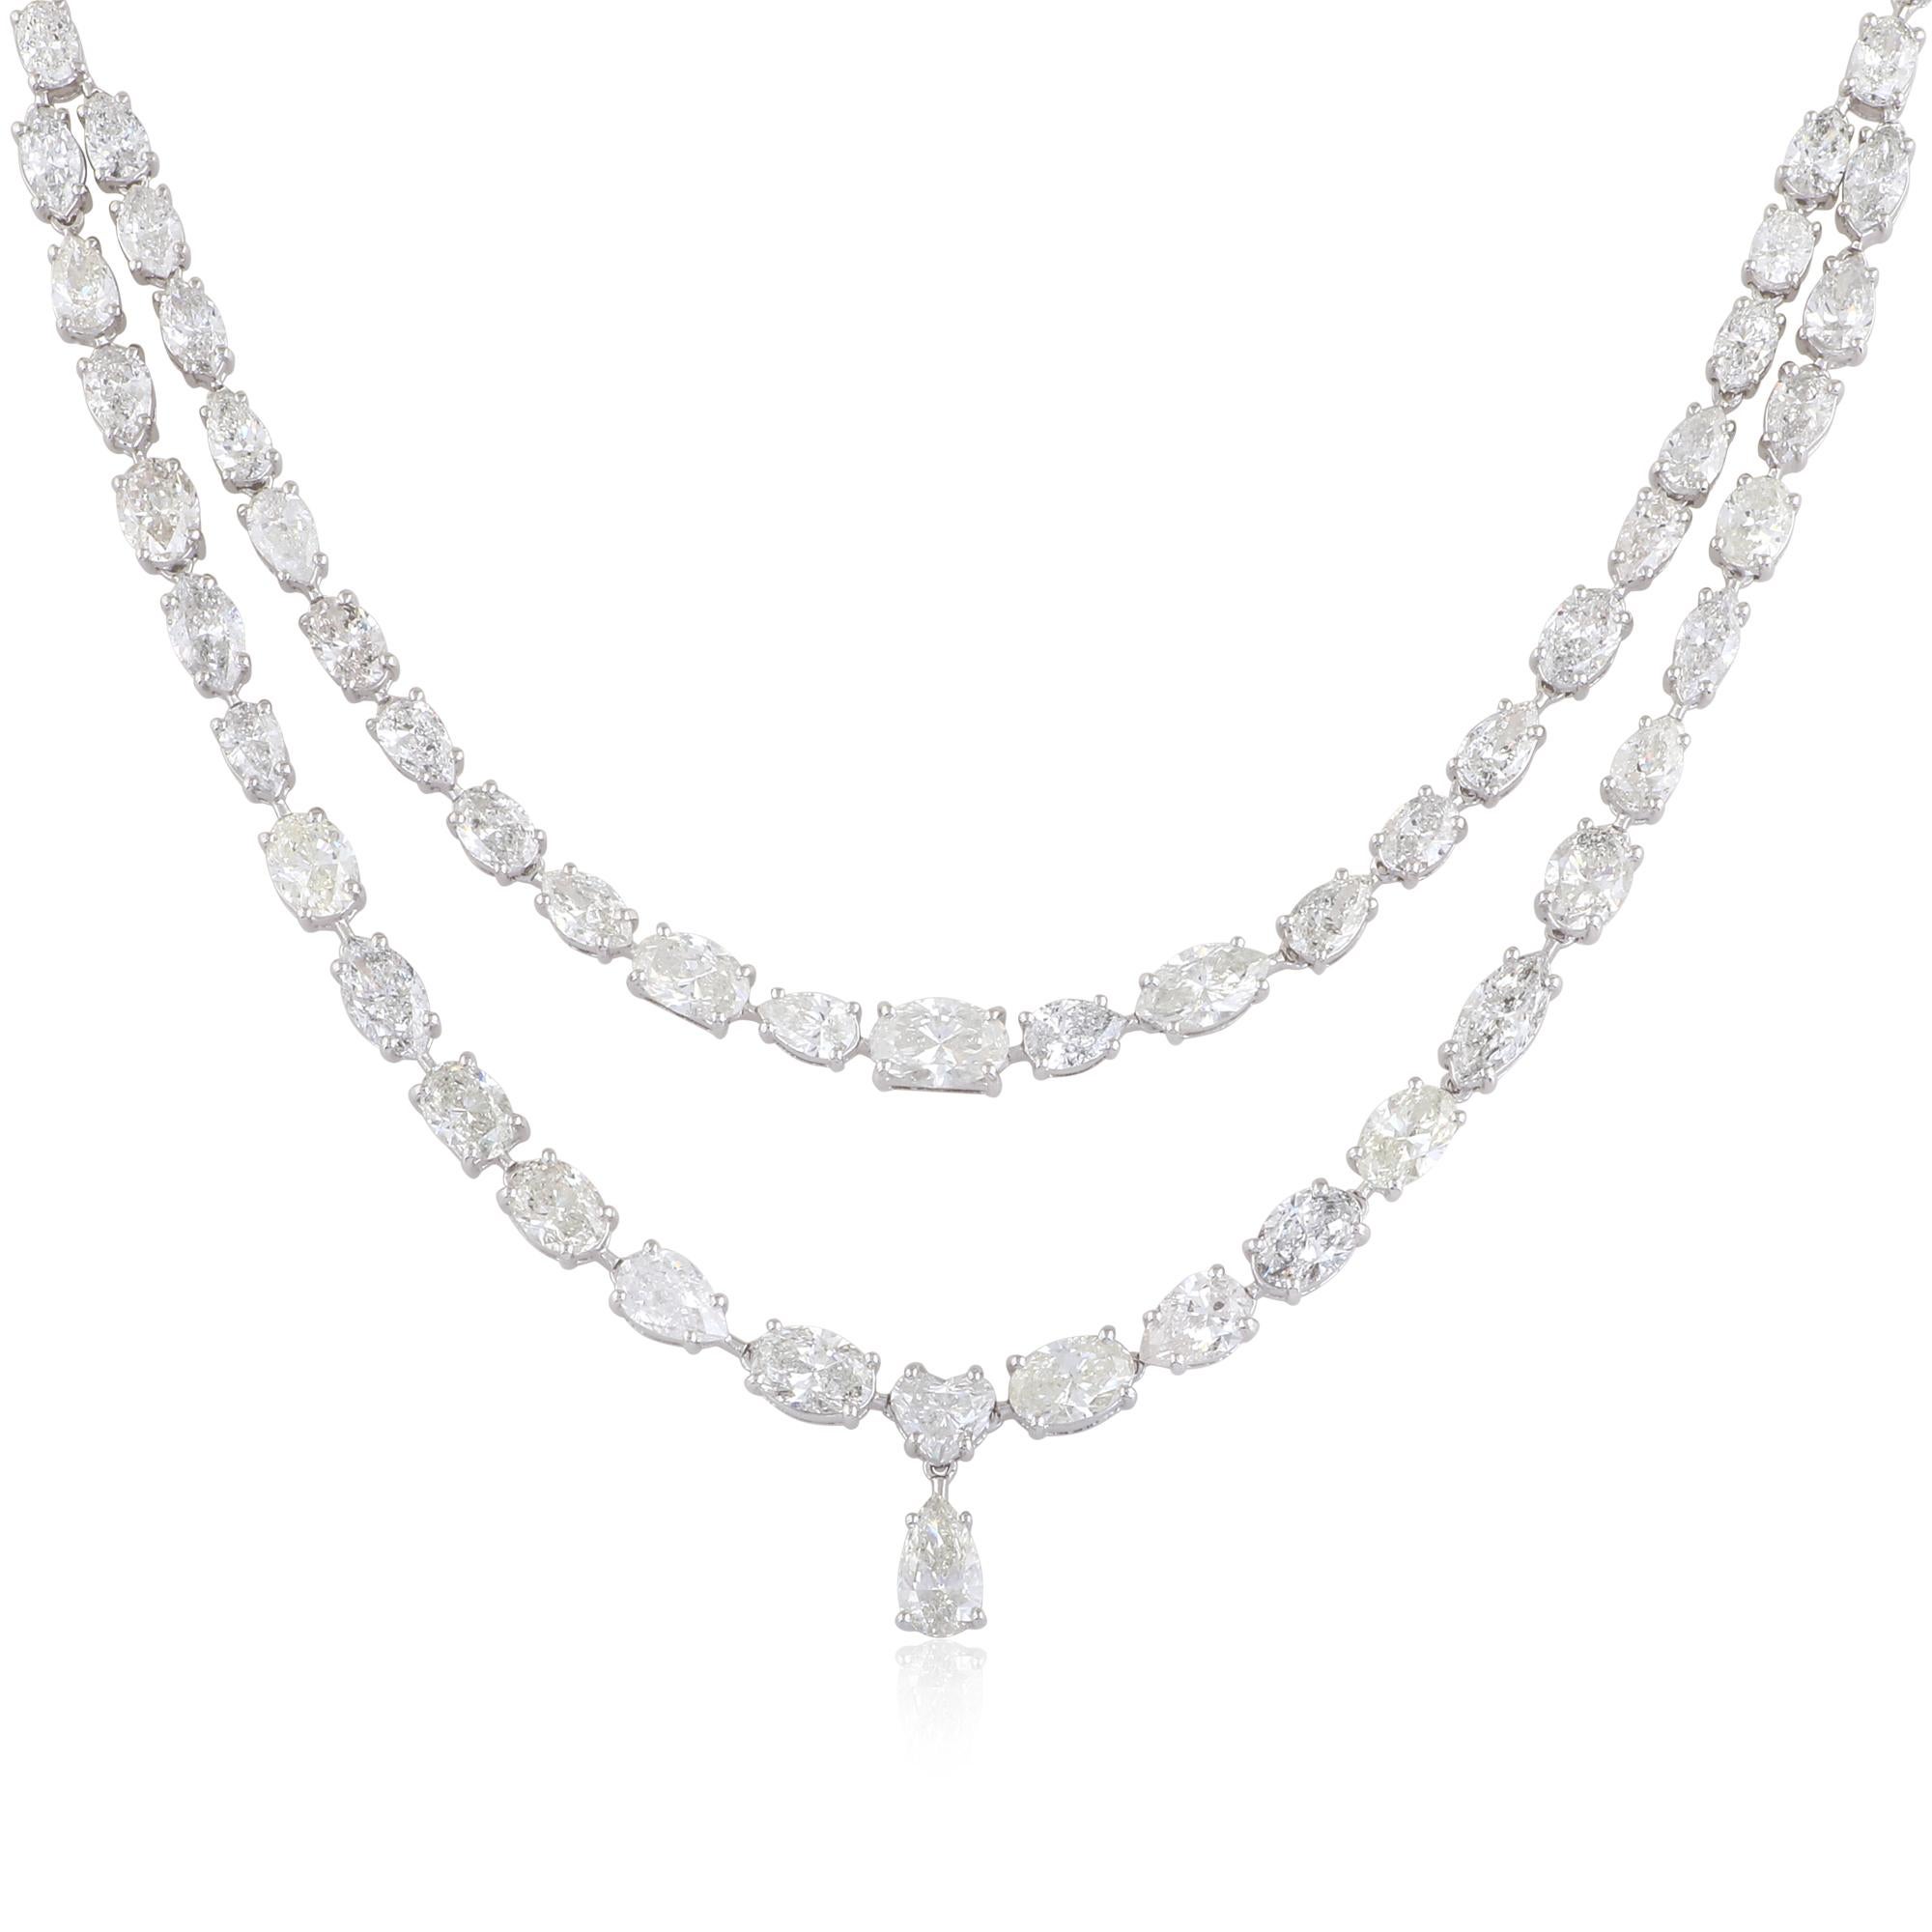 This diamond necklace is a true statement piece, embodying luxury and extravagance. Whether worn for a special occasion or to elevate everyday attire, it is guaranteed to command attention and admiration. Its versatility allows it to effortlessly